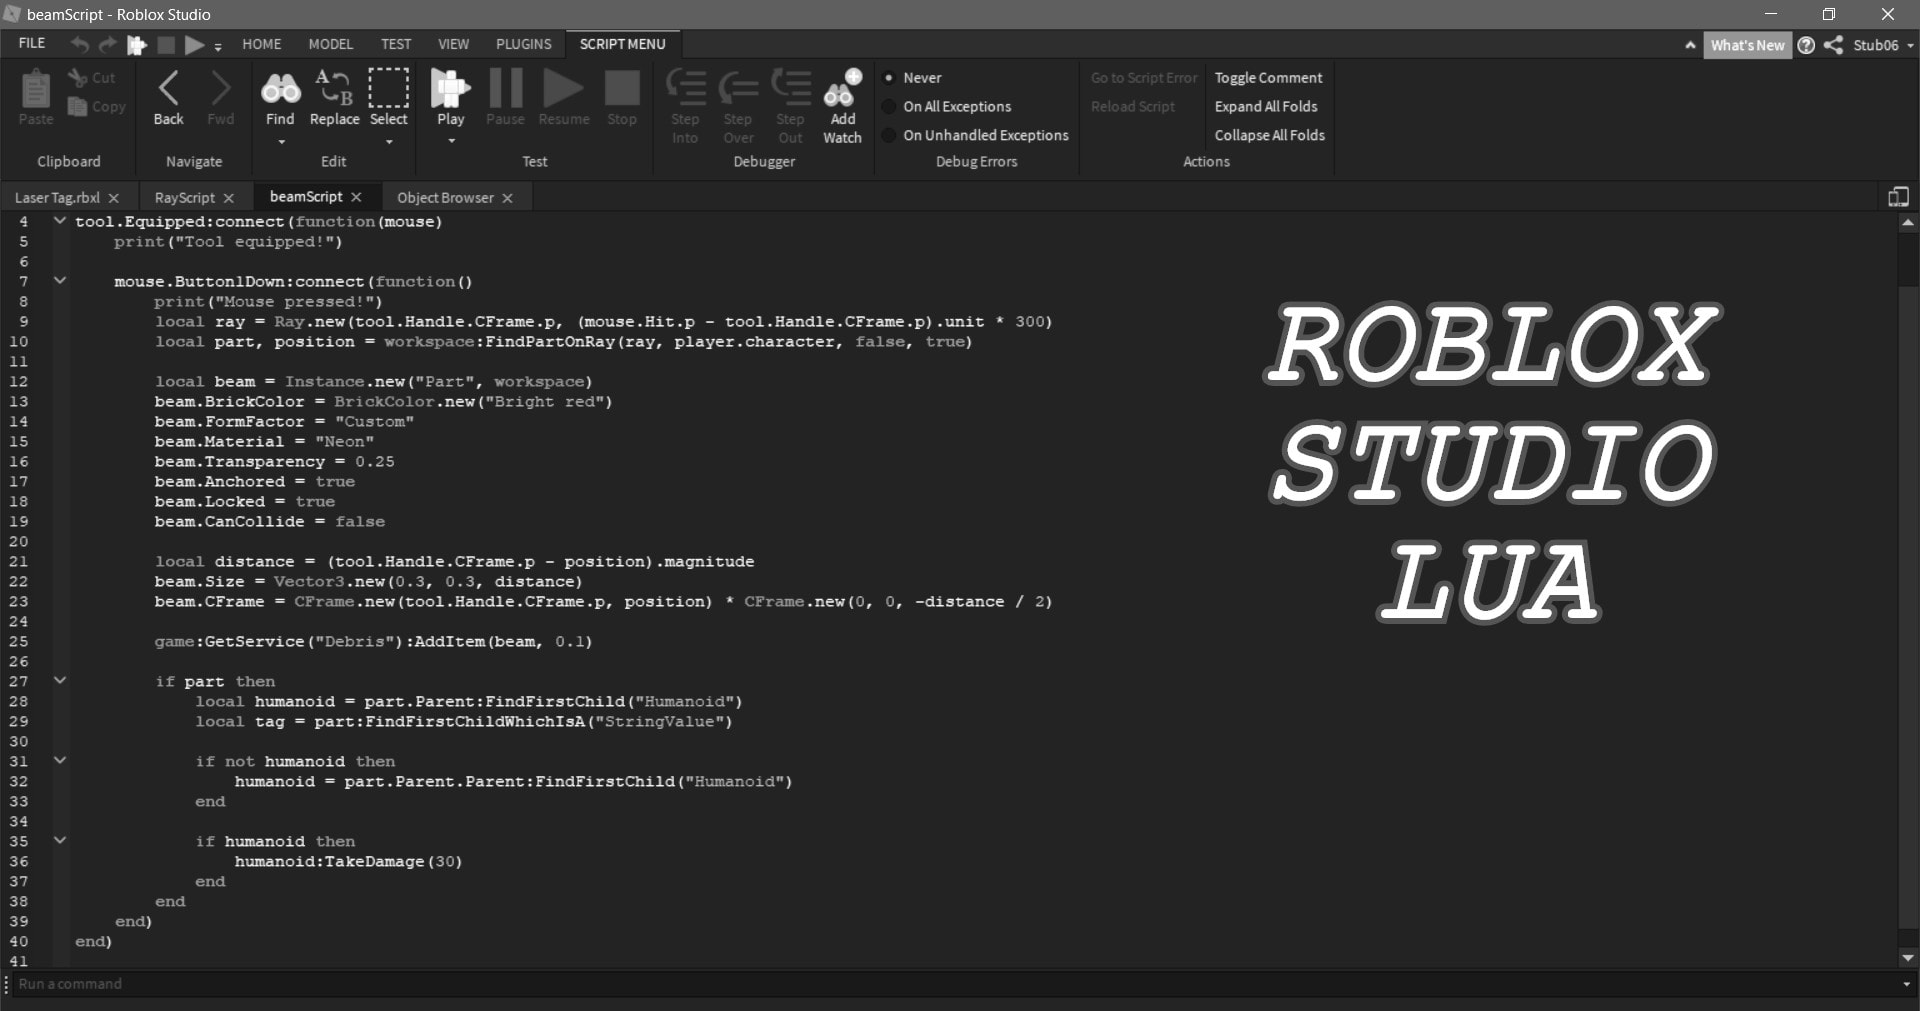 Code Cool Features And Such For You In Roblox Studio By Stub06 Fiverr - code roblox studio